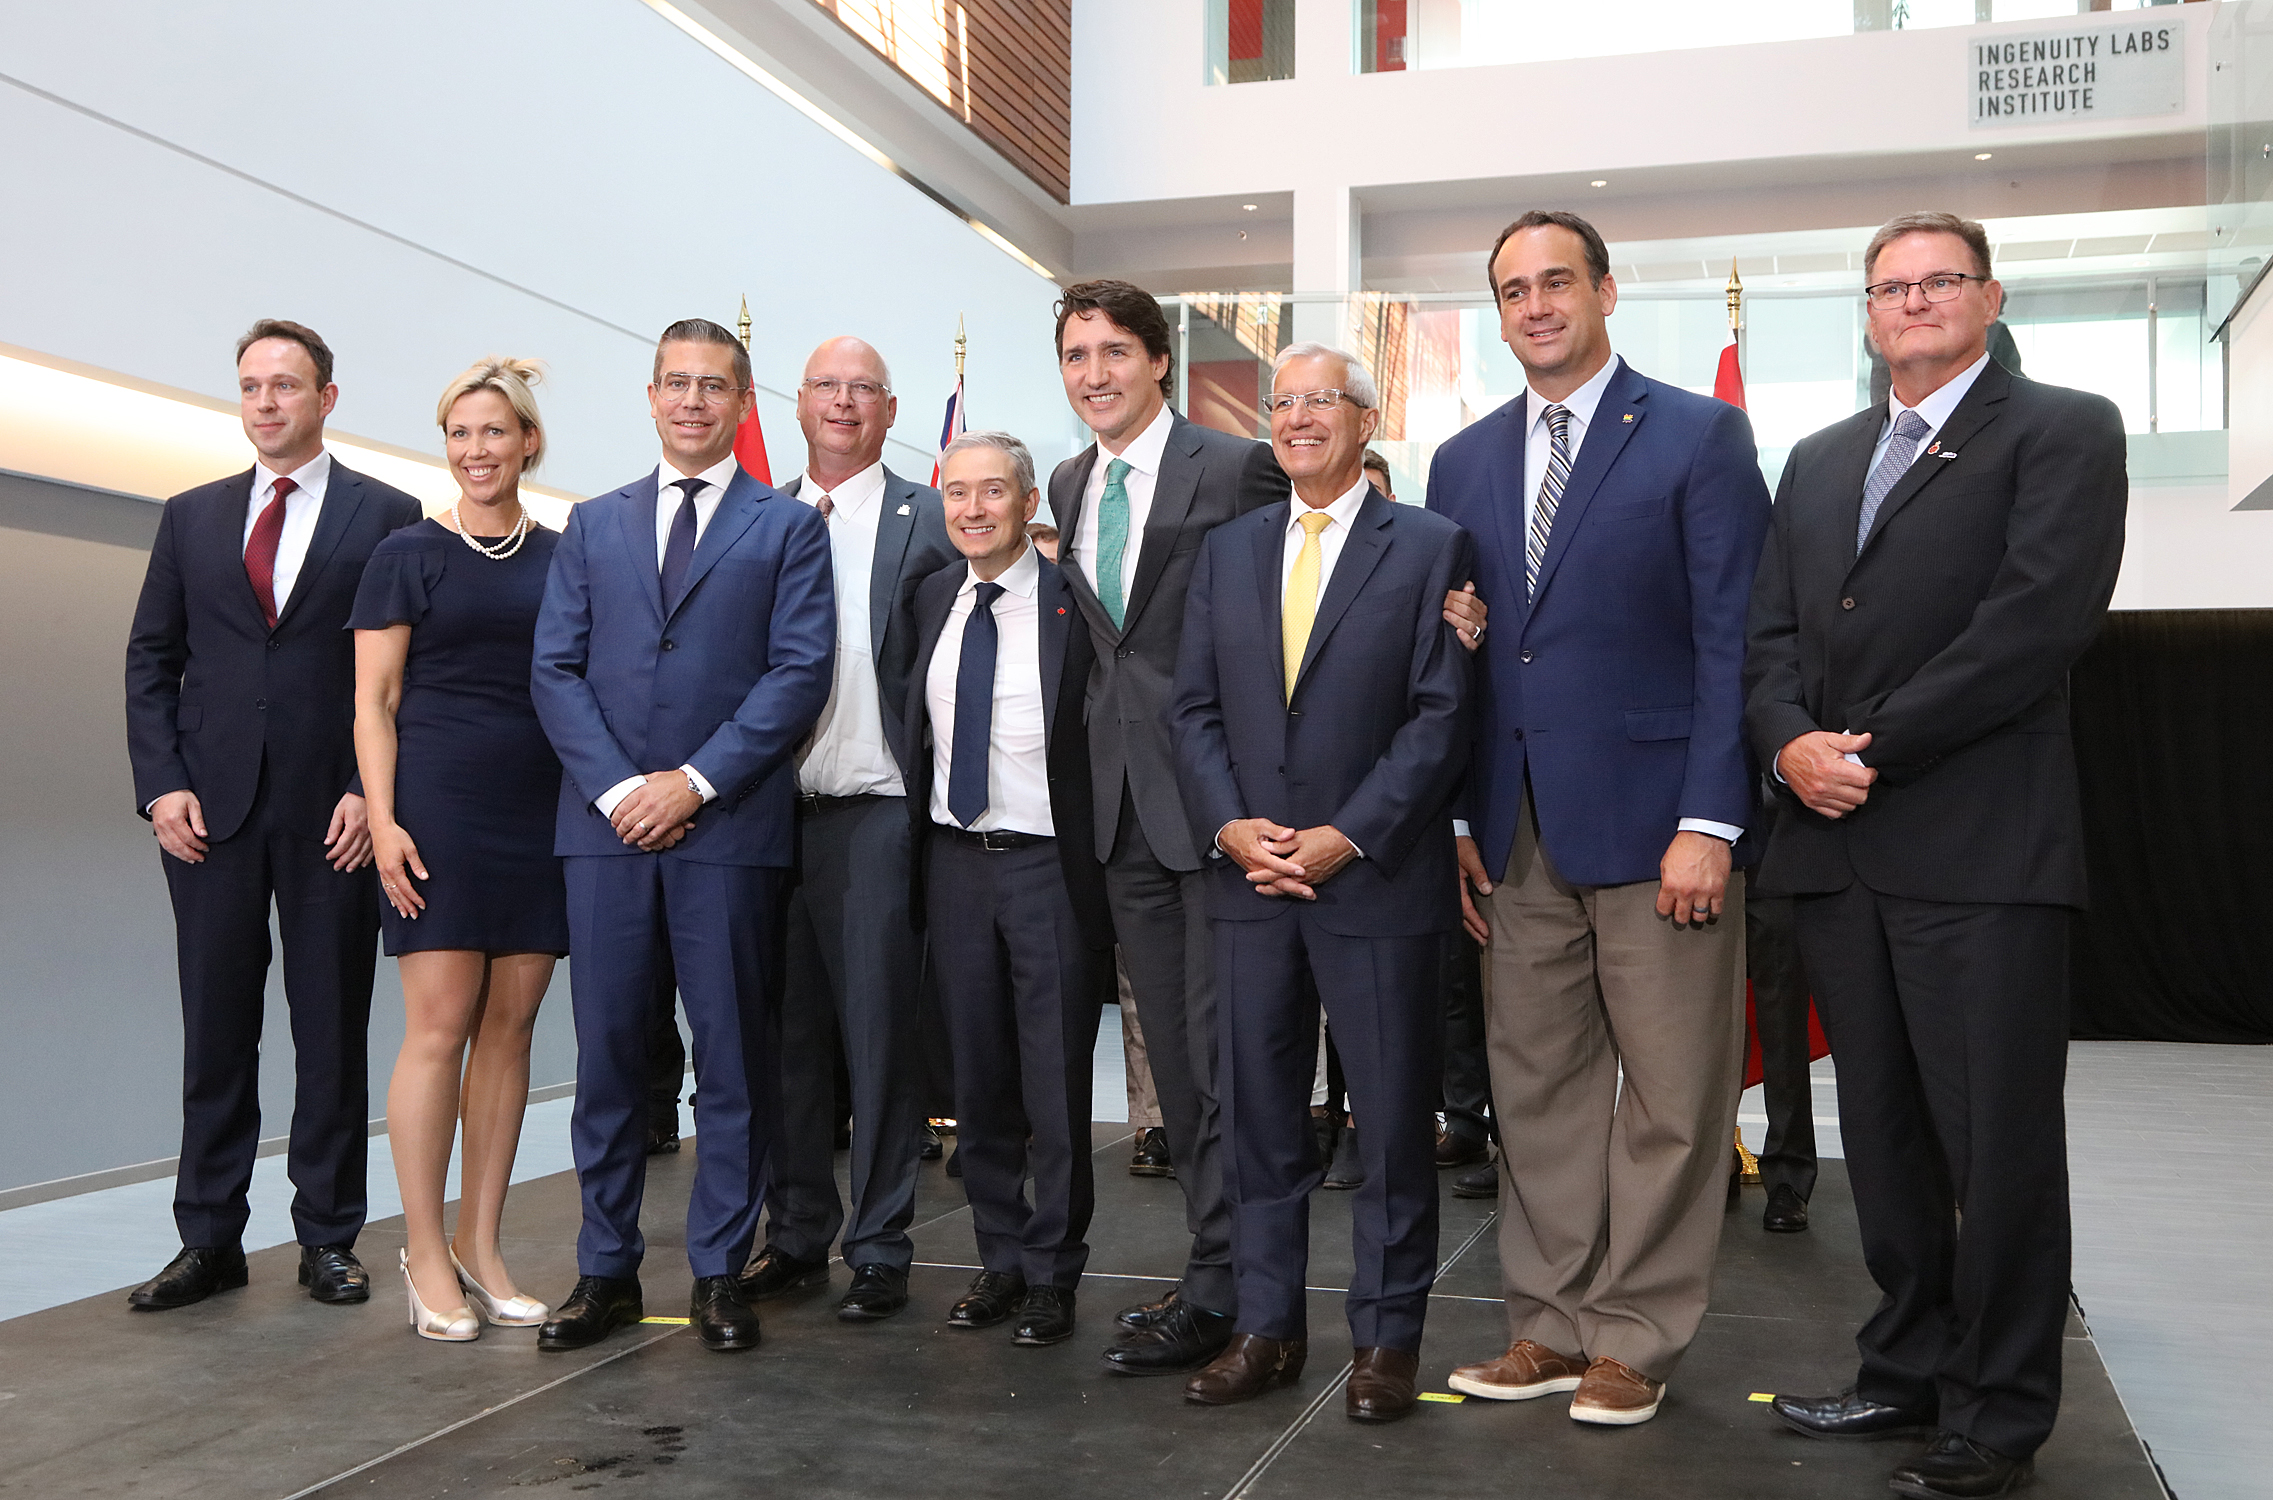 From left, Belgium’s Ambassador to Canada, Patrick Van Gheel, MP Shelby Kramp, MPP Ric Bresee, Mathias Miedreich, CEO of Umicore, and his wife, Prime Minister Justin Trudeau, François-Philippe Champagne, Minister of Innovation, Science and Industry, Vic Fedeli, Minister of Economic Development, Job Creation and Trade, MP Mark Gerretsen, and Jim Hegadorn, Deputy Mayor Loyalist Township, announcing the new plant. 